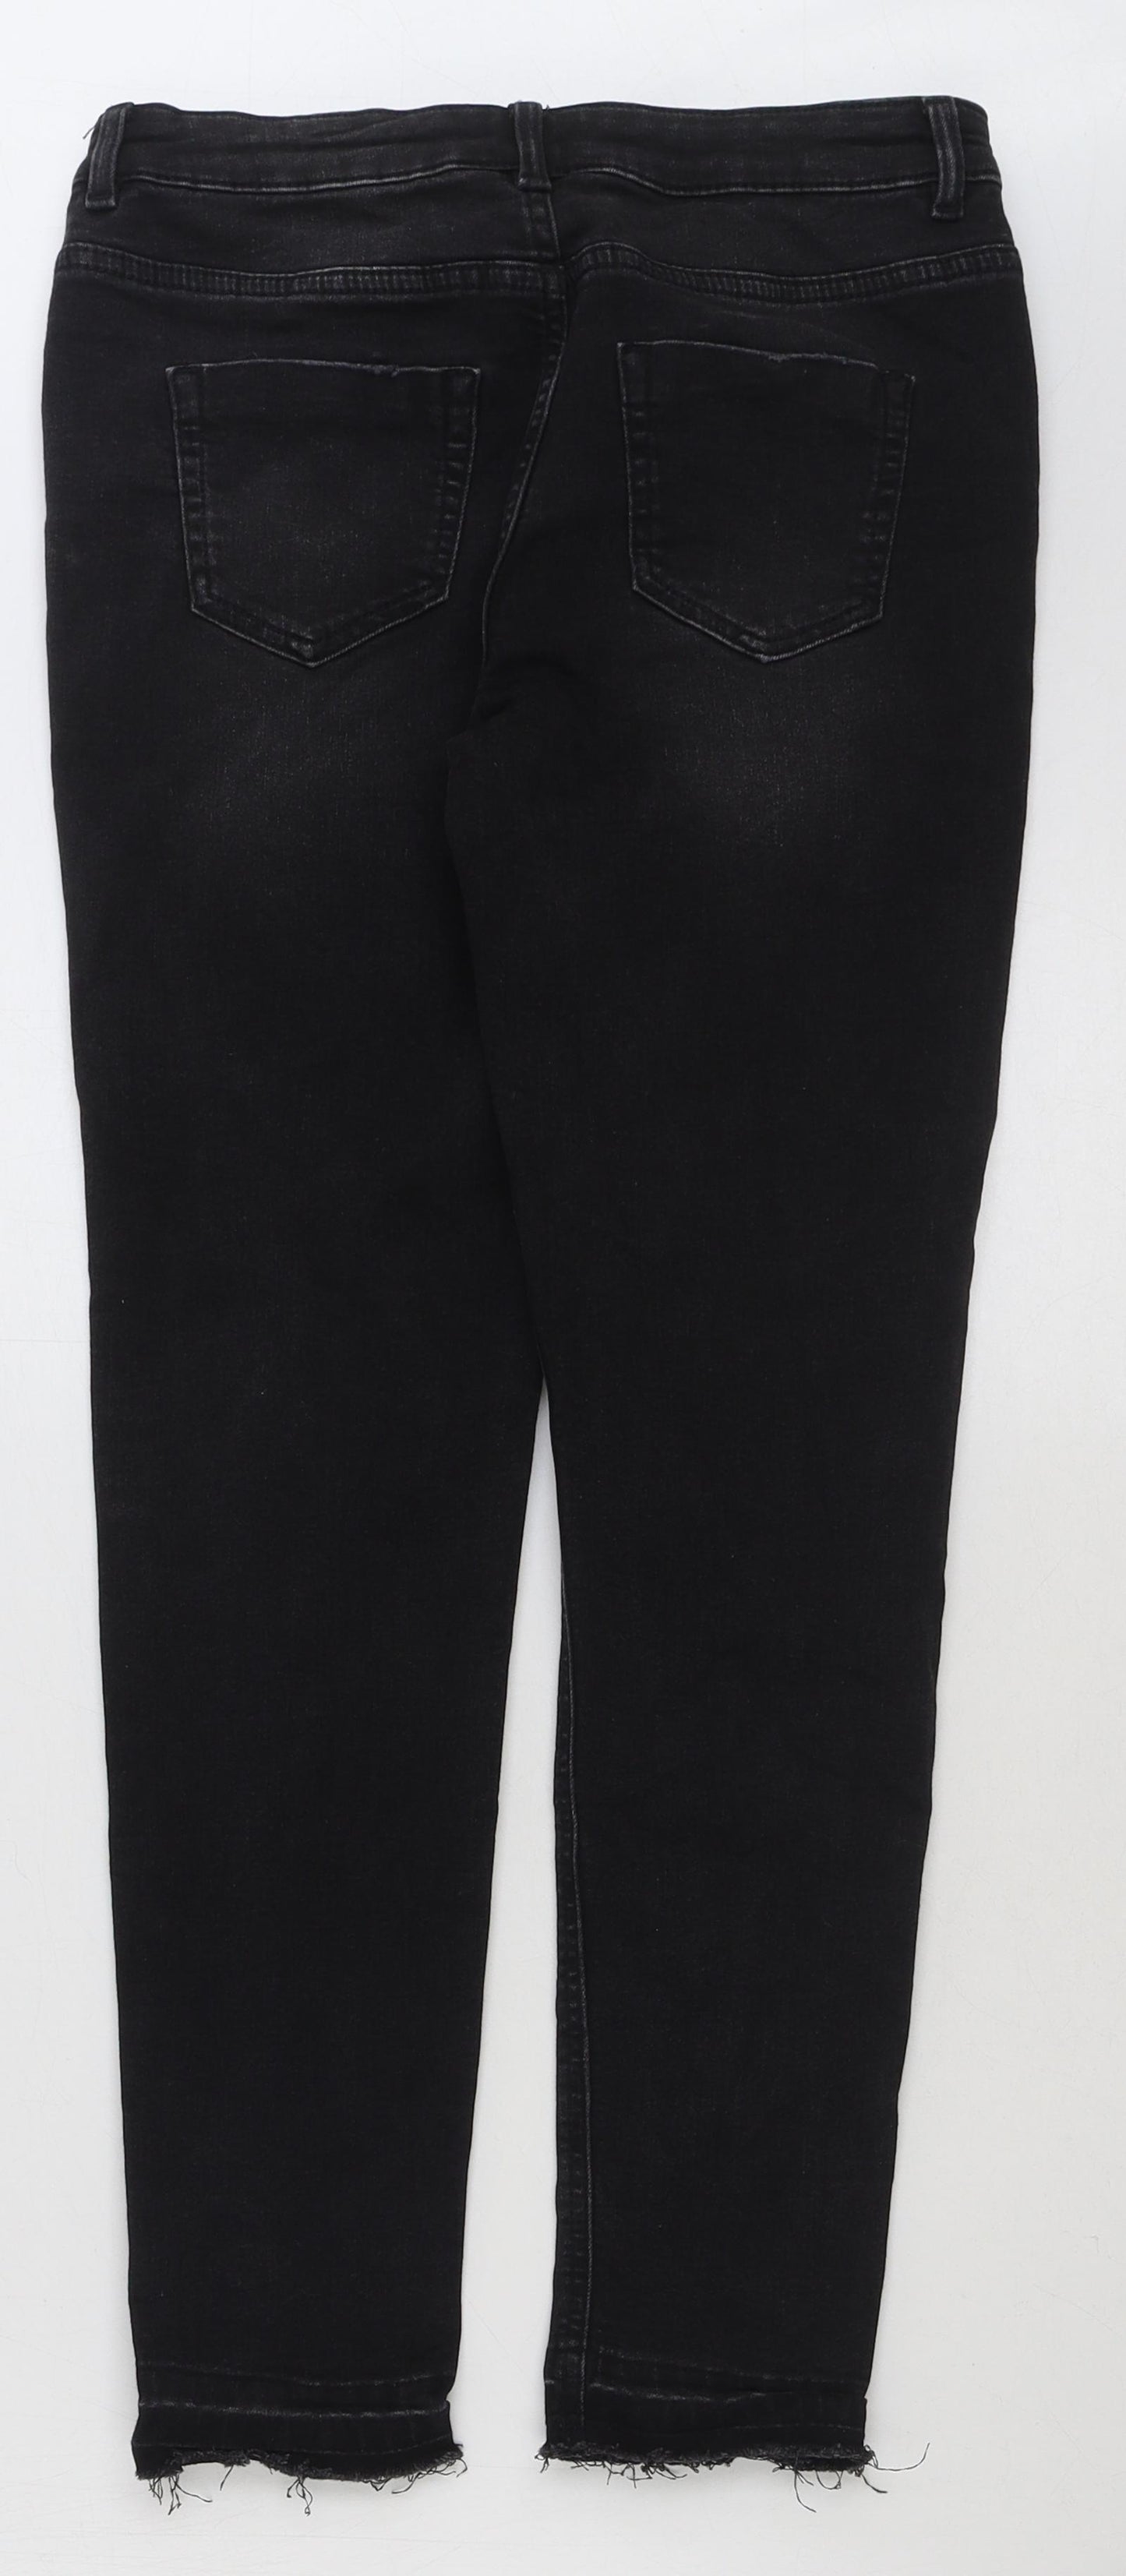 Marks and Spencer Girls Black Cotton Skinny Jeans Size 12-13 Years Regular Button - Distressed